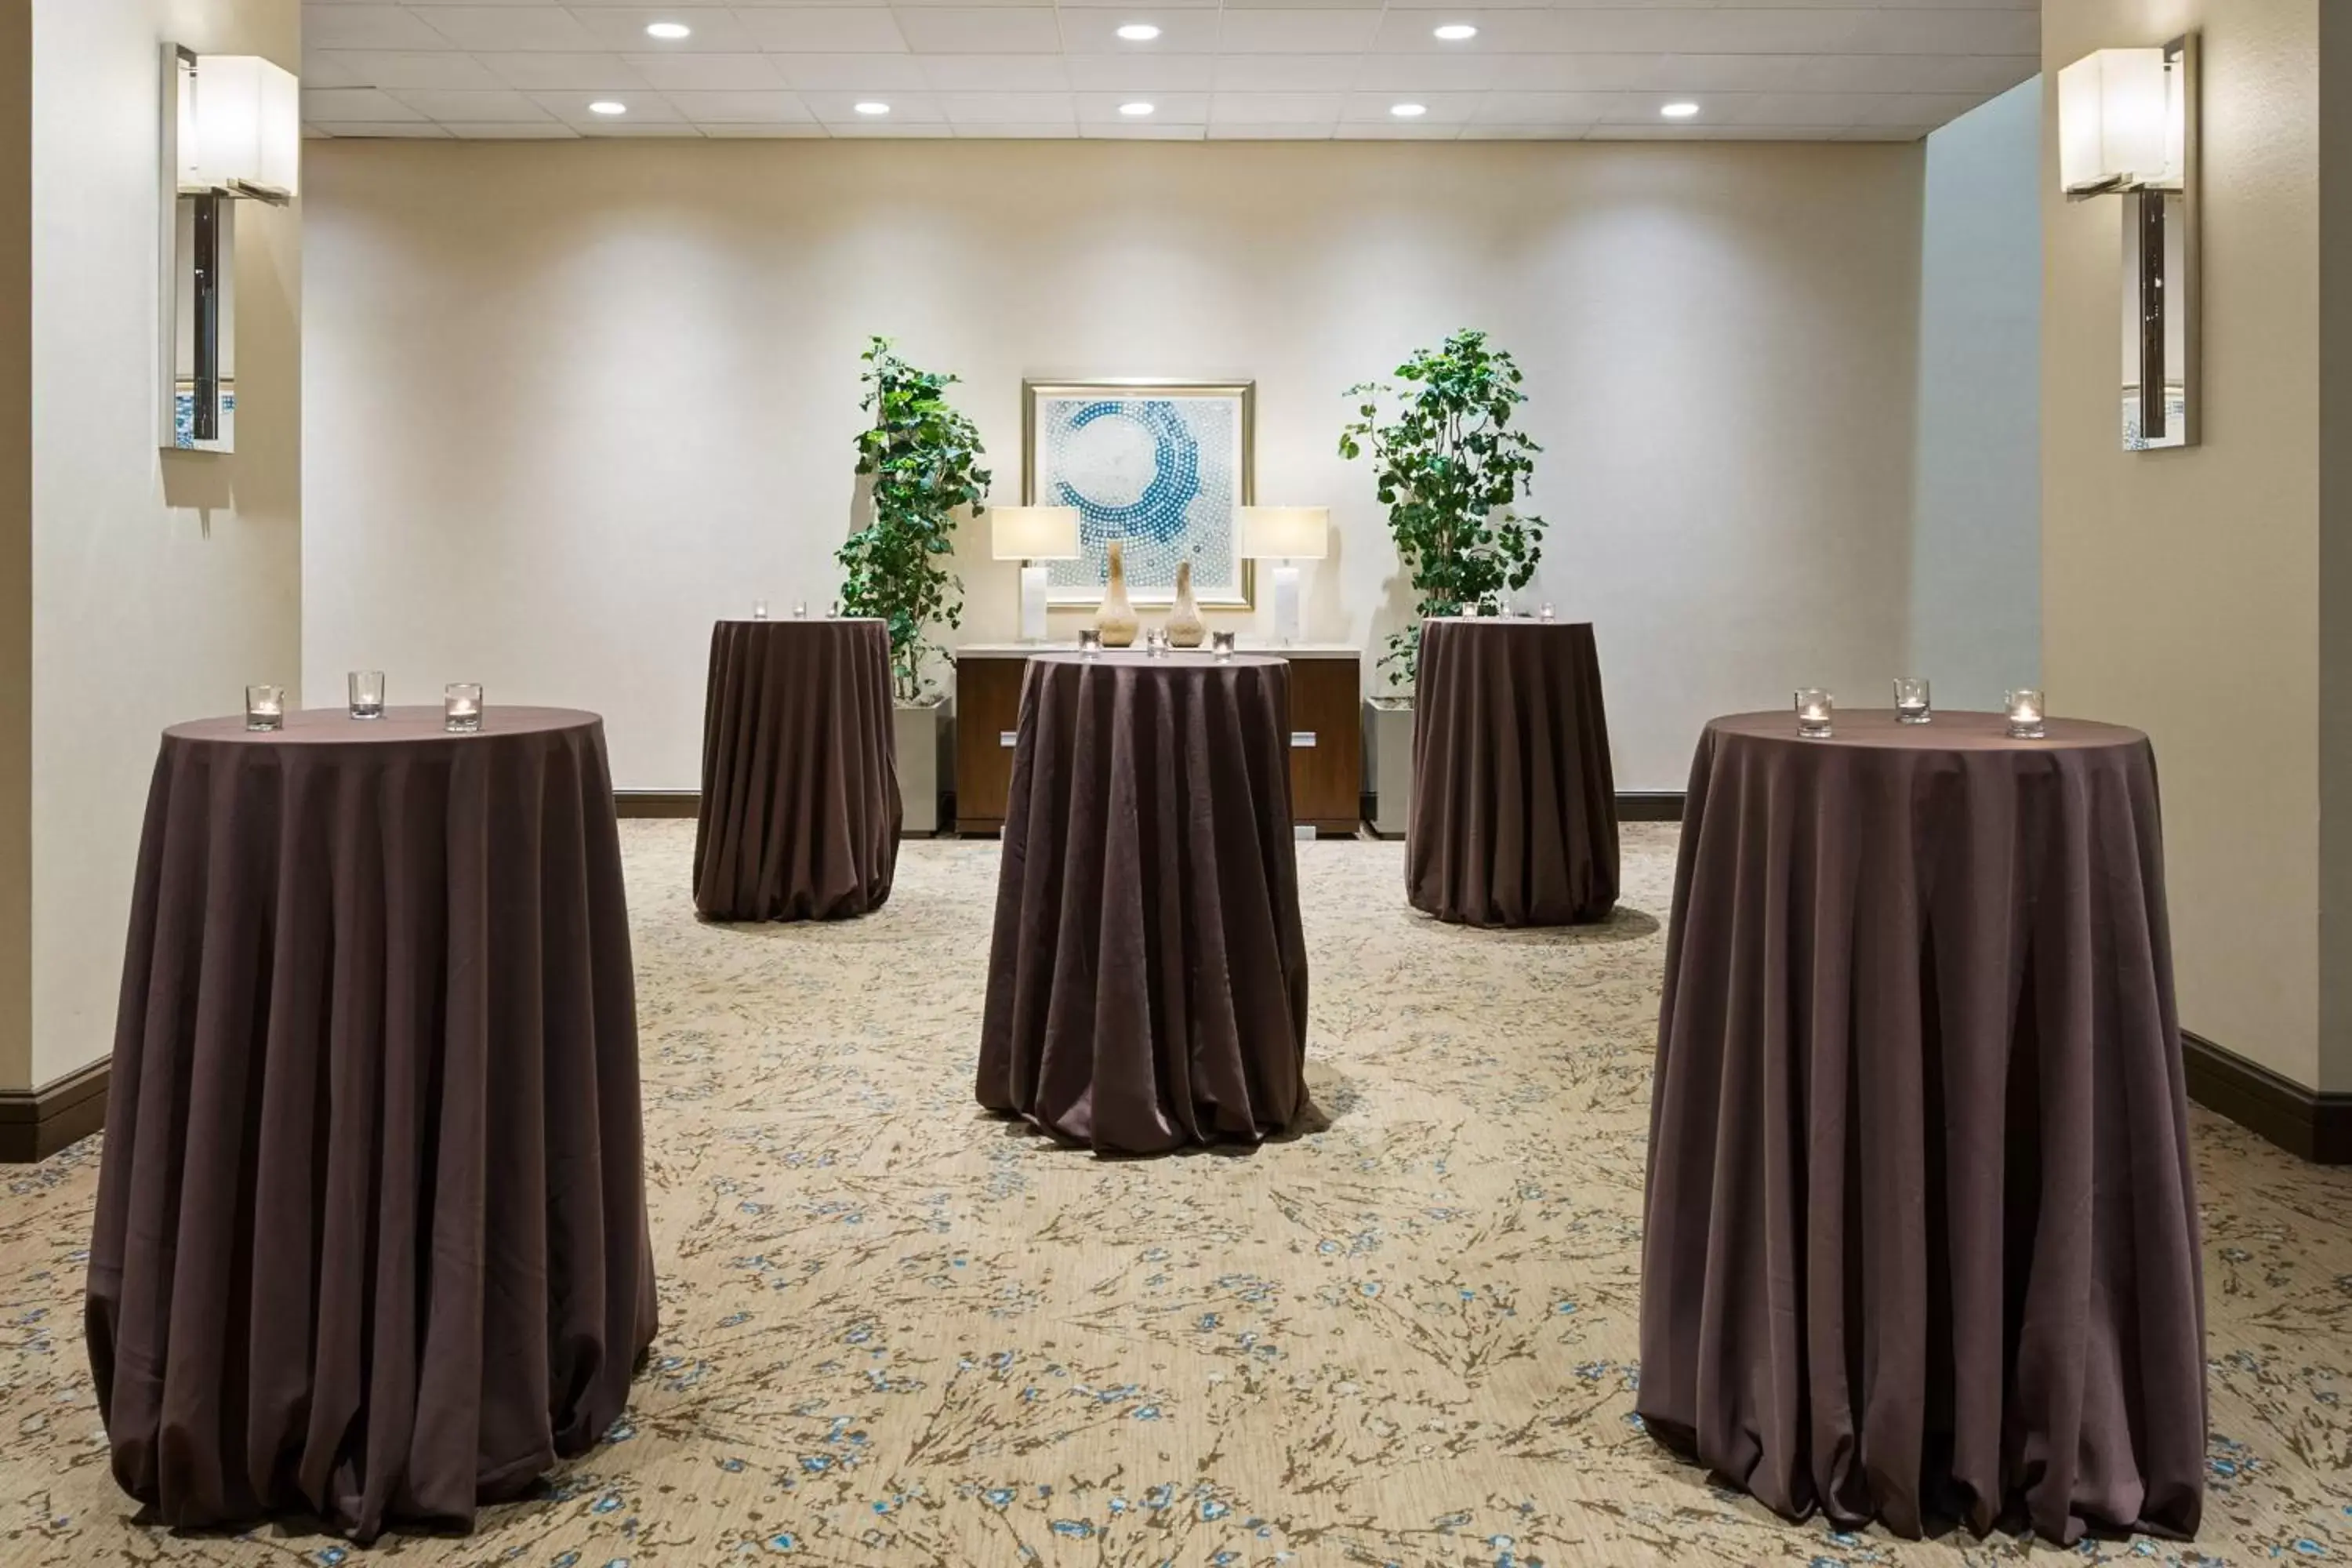 Meeting/conference room, Banquet Facilities in The Westin Crystal City Reagan National Airport